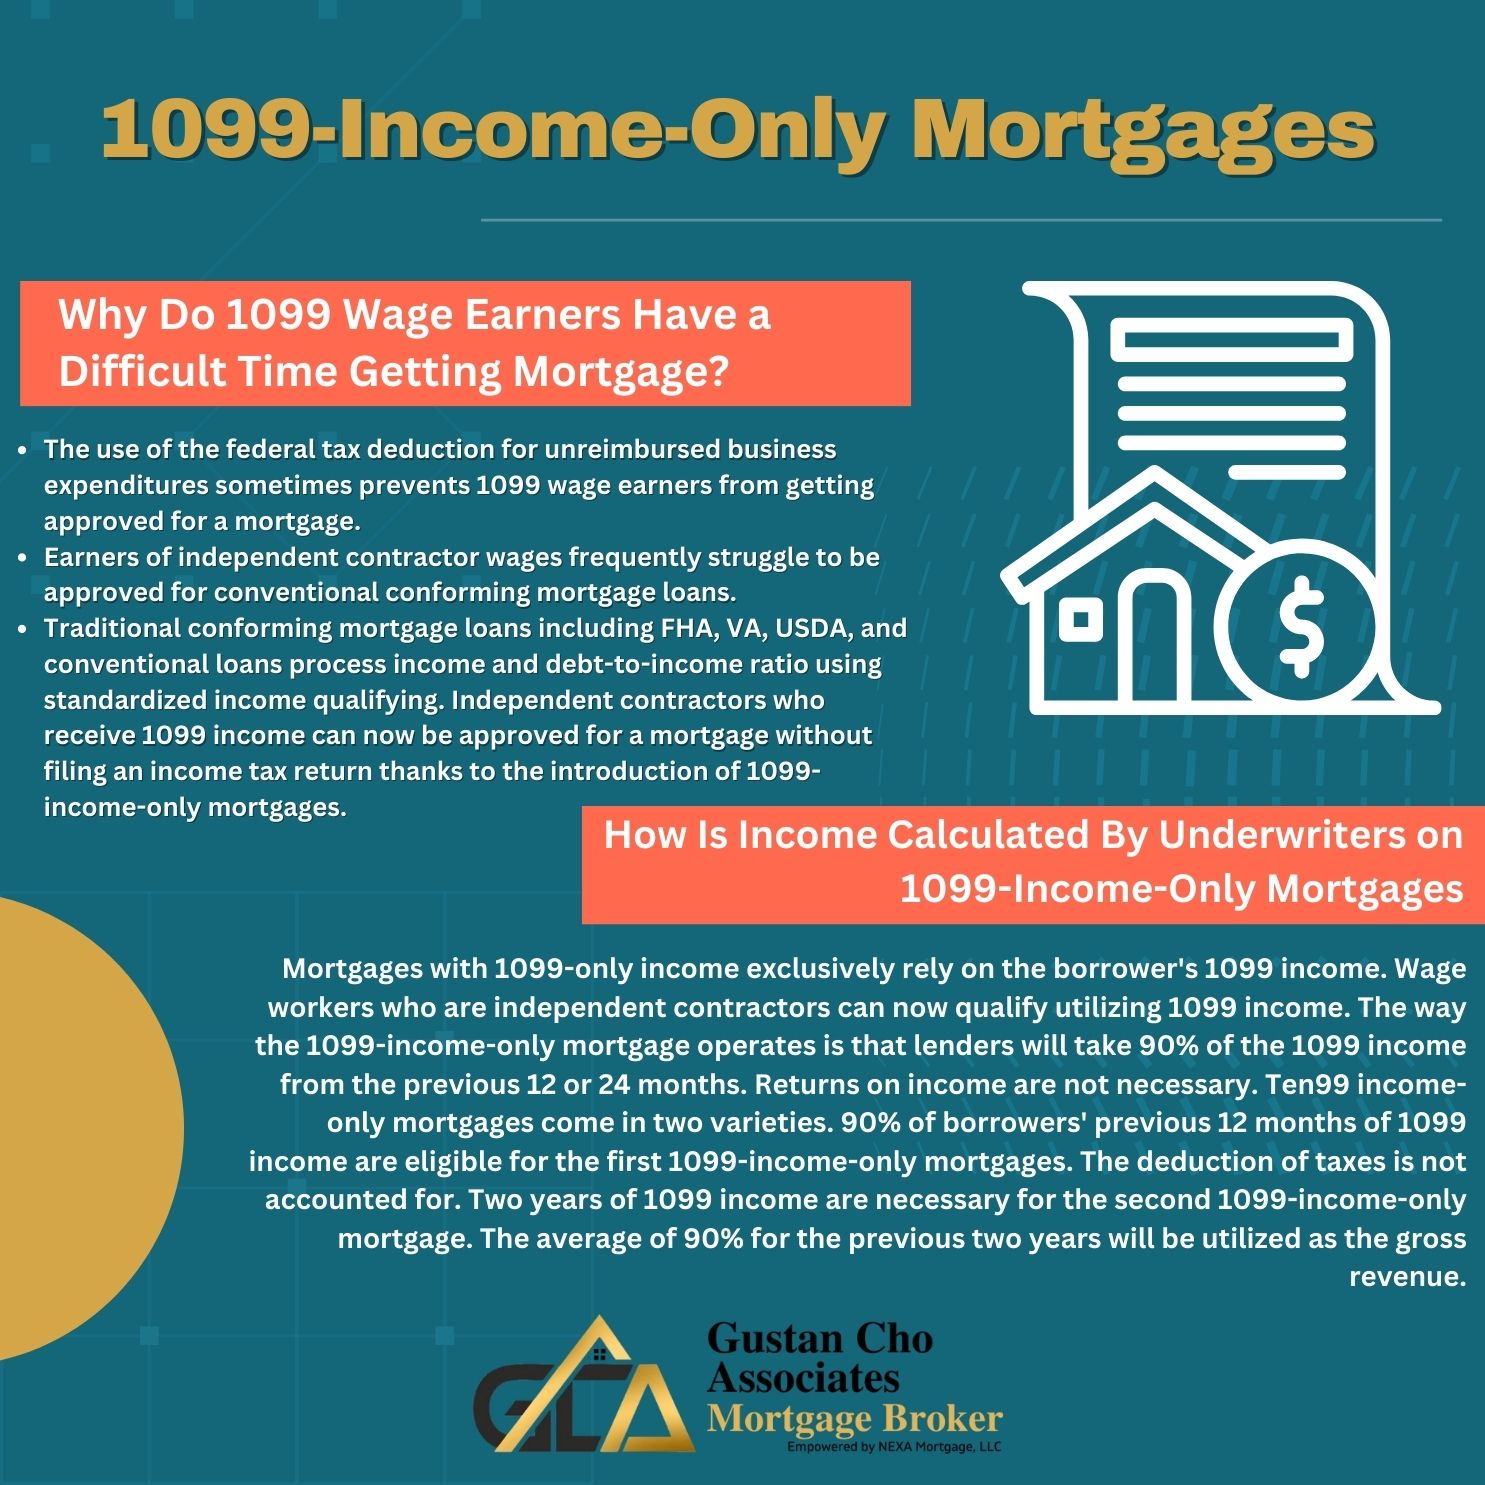 Why Do 1099 Wage Earners Have a Difficult Time Getting Mortgage